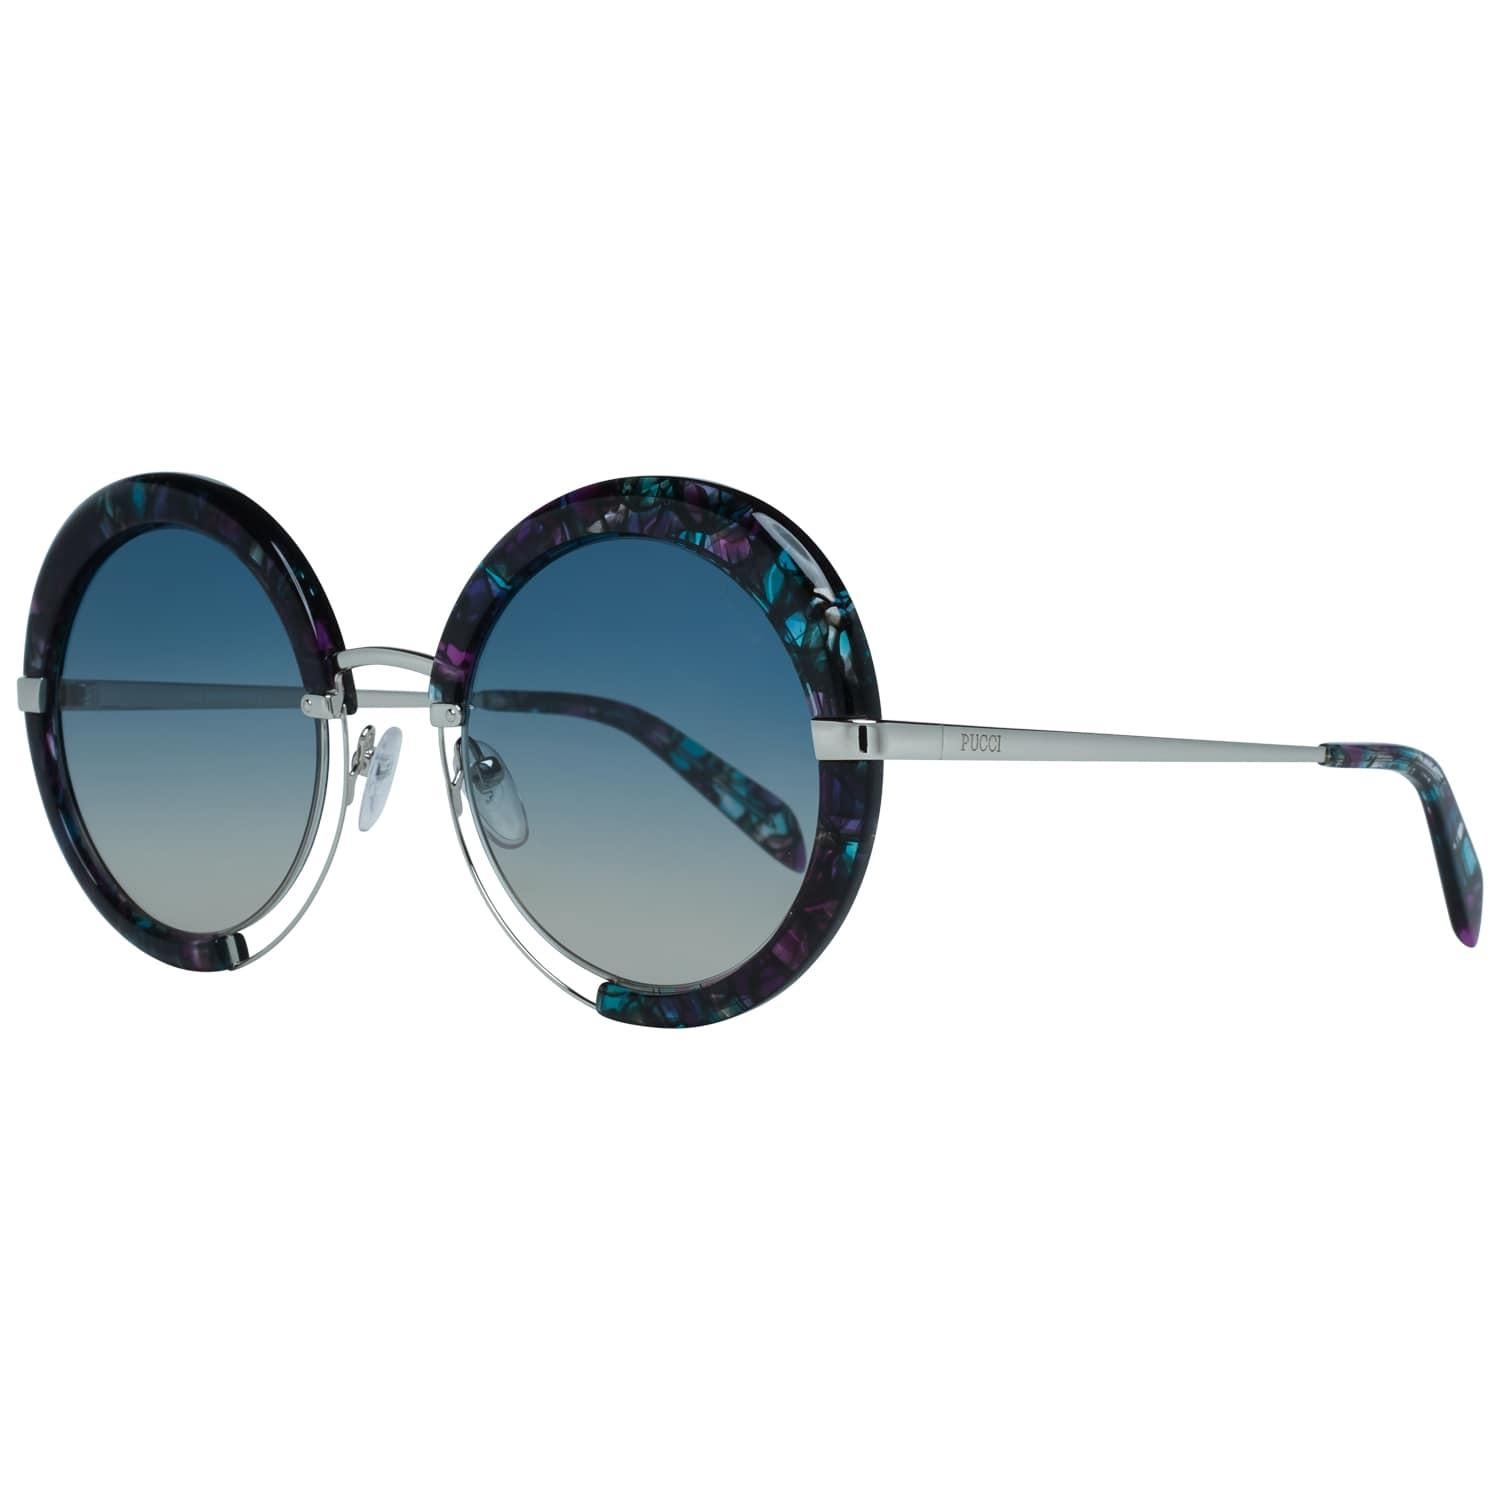 Details

MATERIAL: Acetate

COLOR: Multicolor

MODEL: EP0114 5455P

GENDER: Women

COUNTRY OF MANUFACTURE: China

TYPE: Sunglasses

ORIGINAL CASE?: Yes

STYLE: Round

OCCASION: Casual

FEATURES: Lightweight

LENS COLOR: Turquoise

LENS TECHNOLOGY: